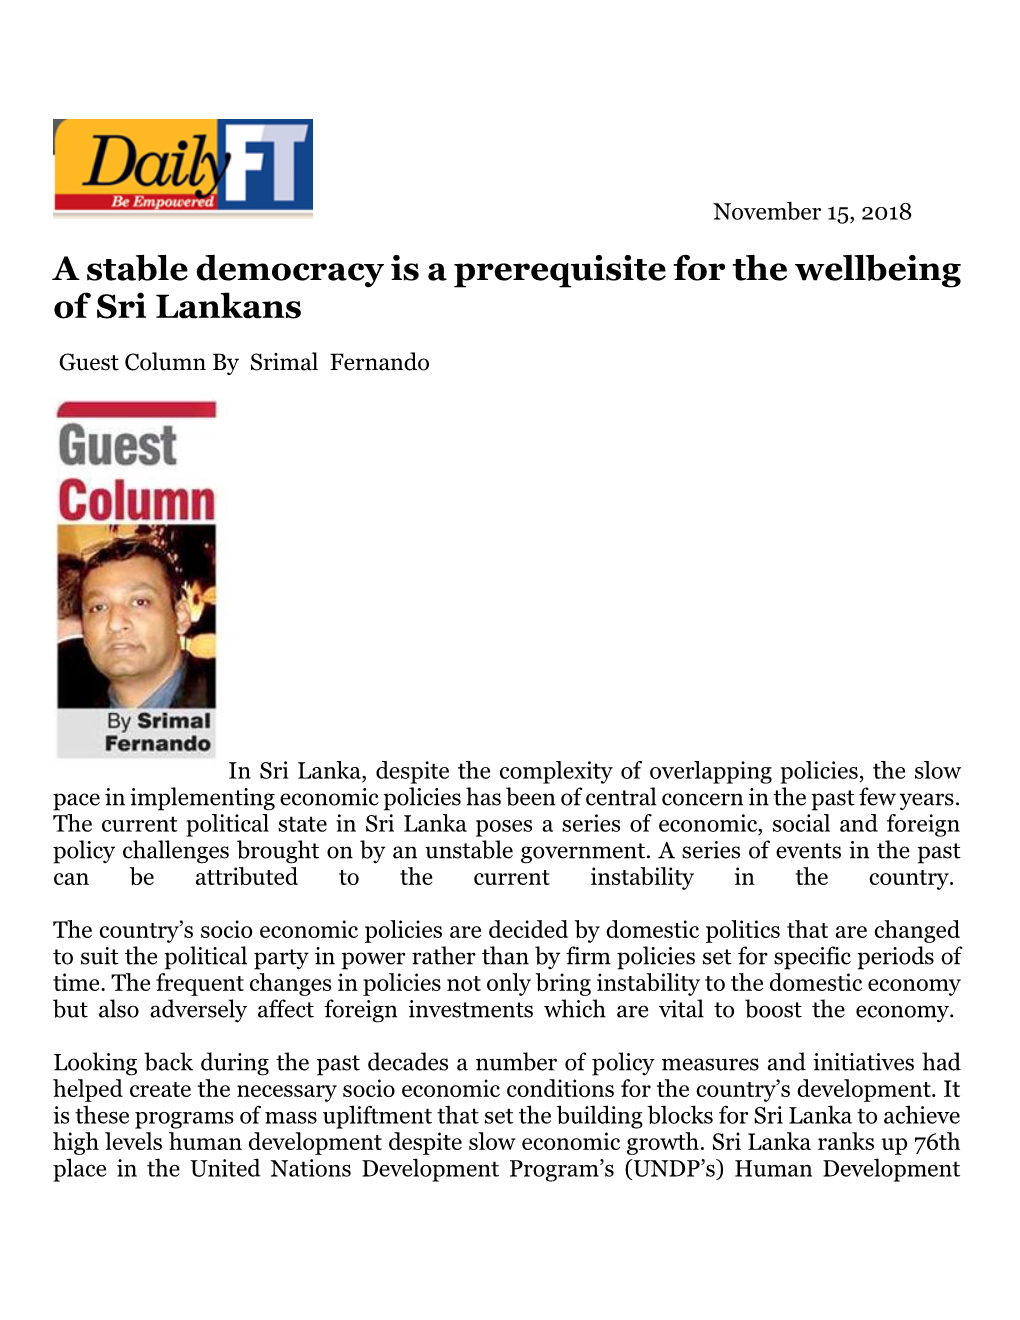 A Stable Democracy Is a Prerequisite for the Wellbeing of Sri Lankans